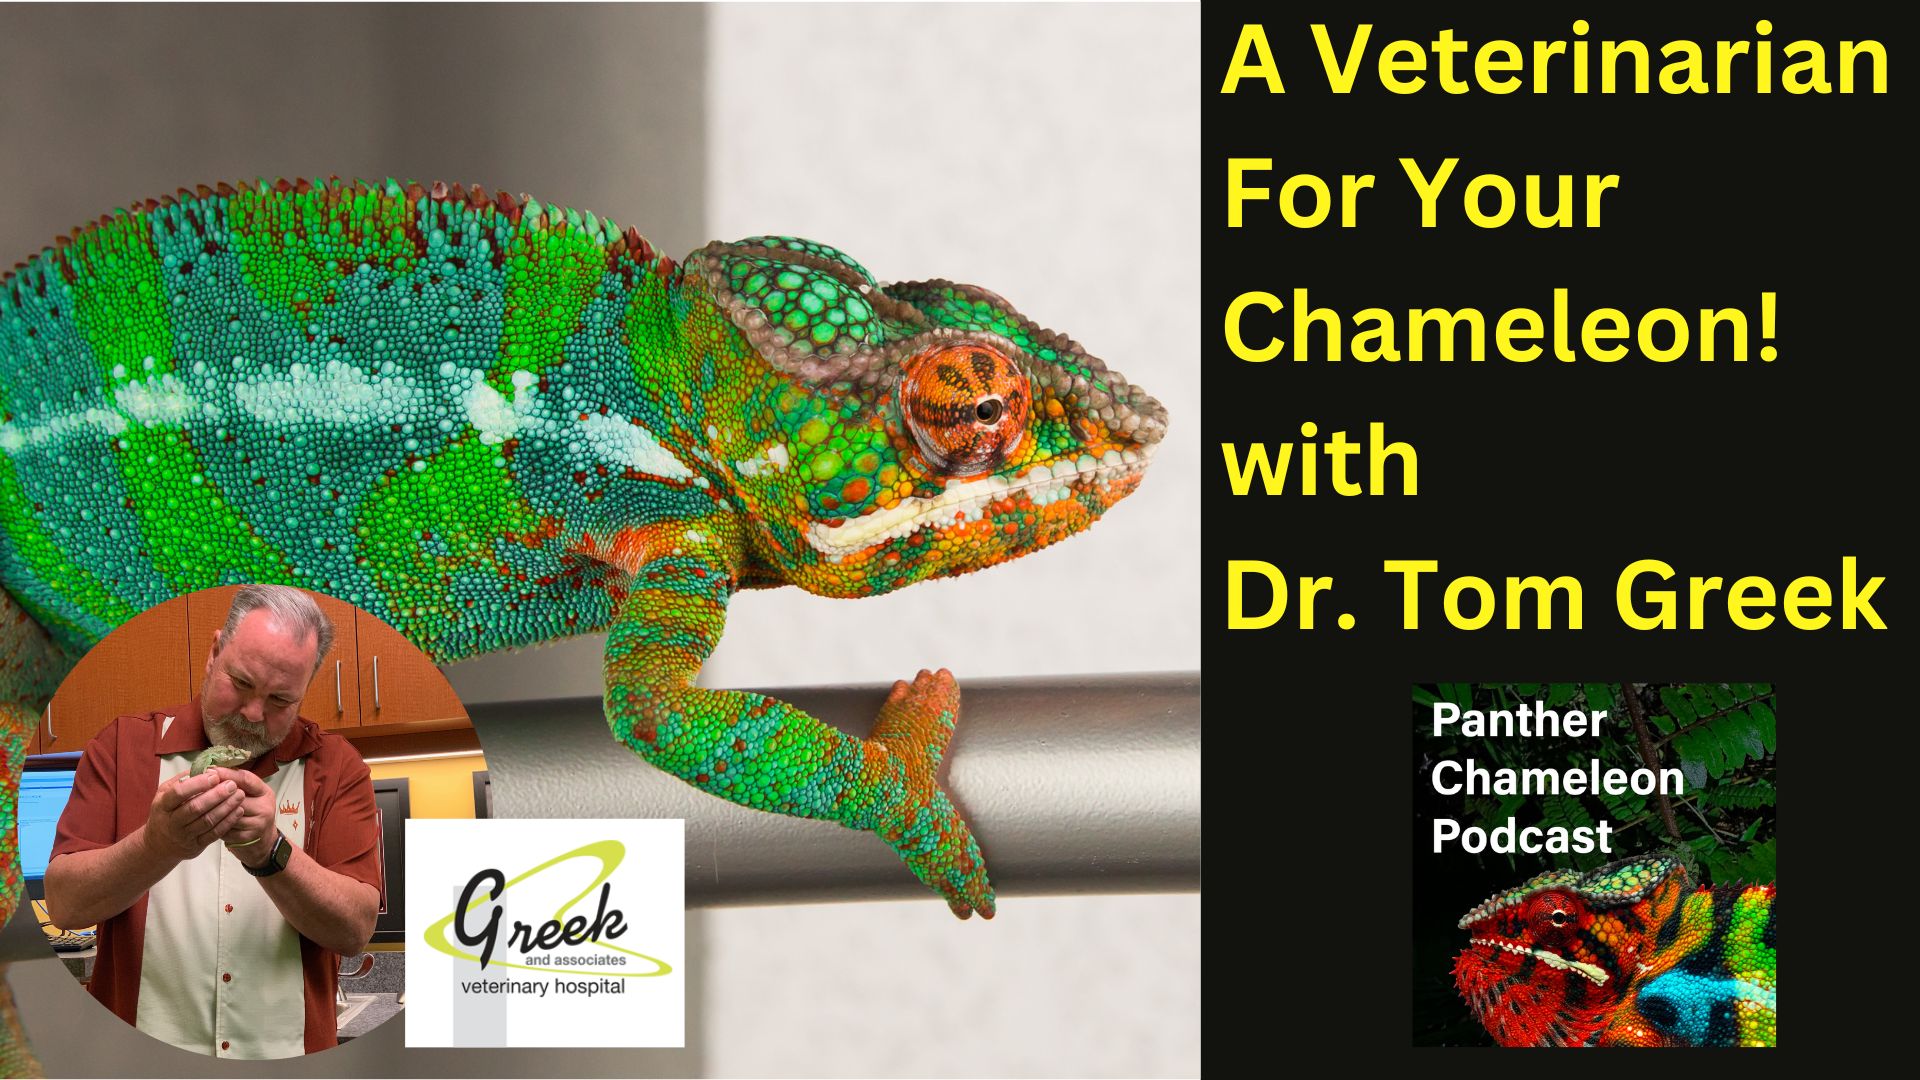 Panther Chameleon with Veterinarian